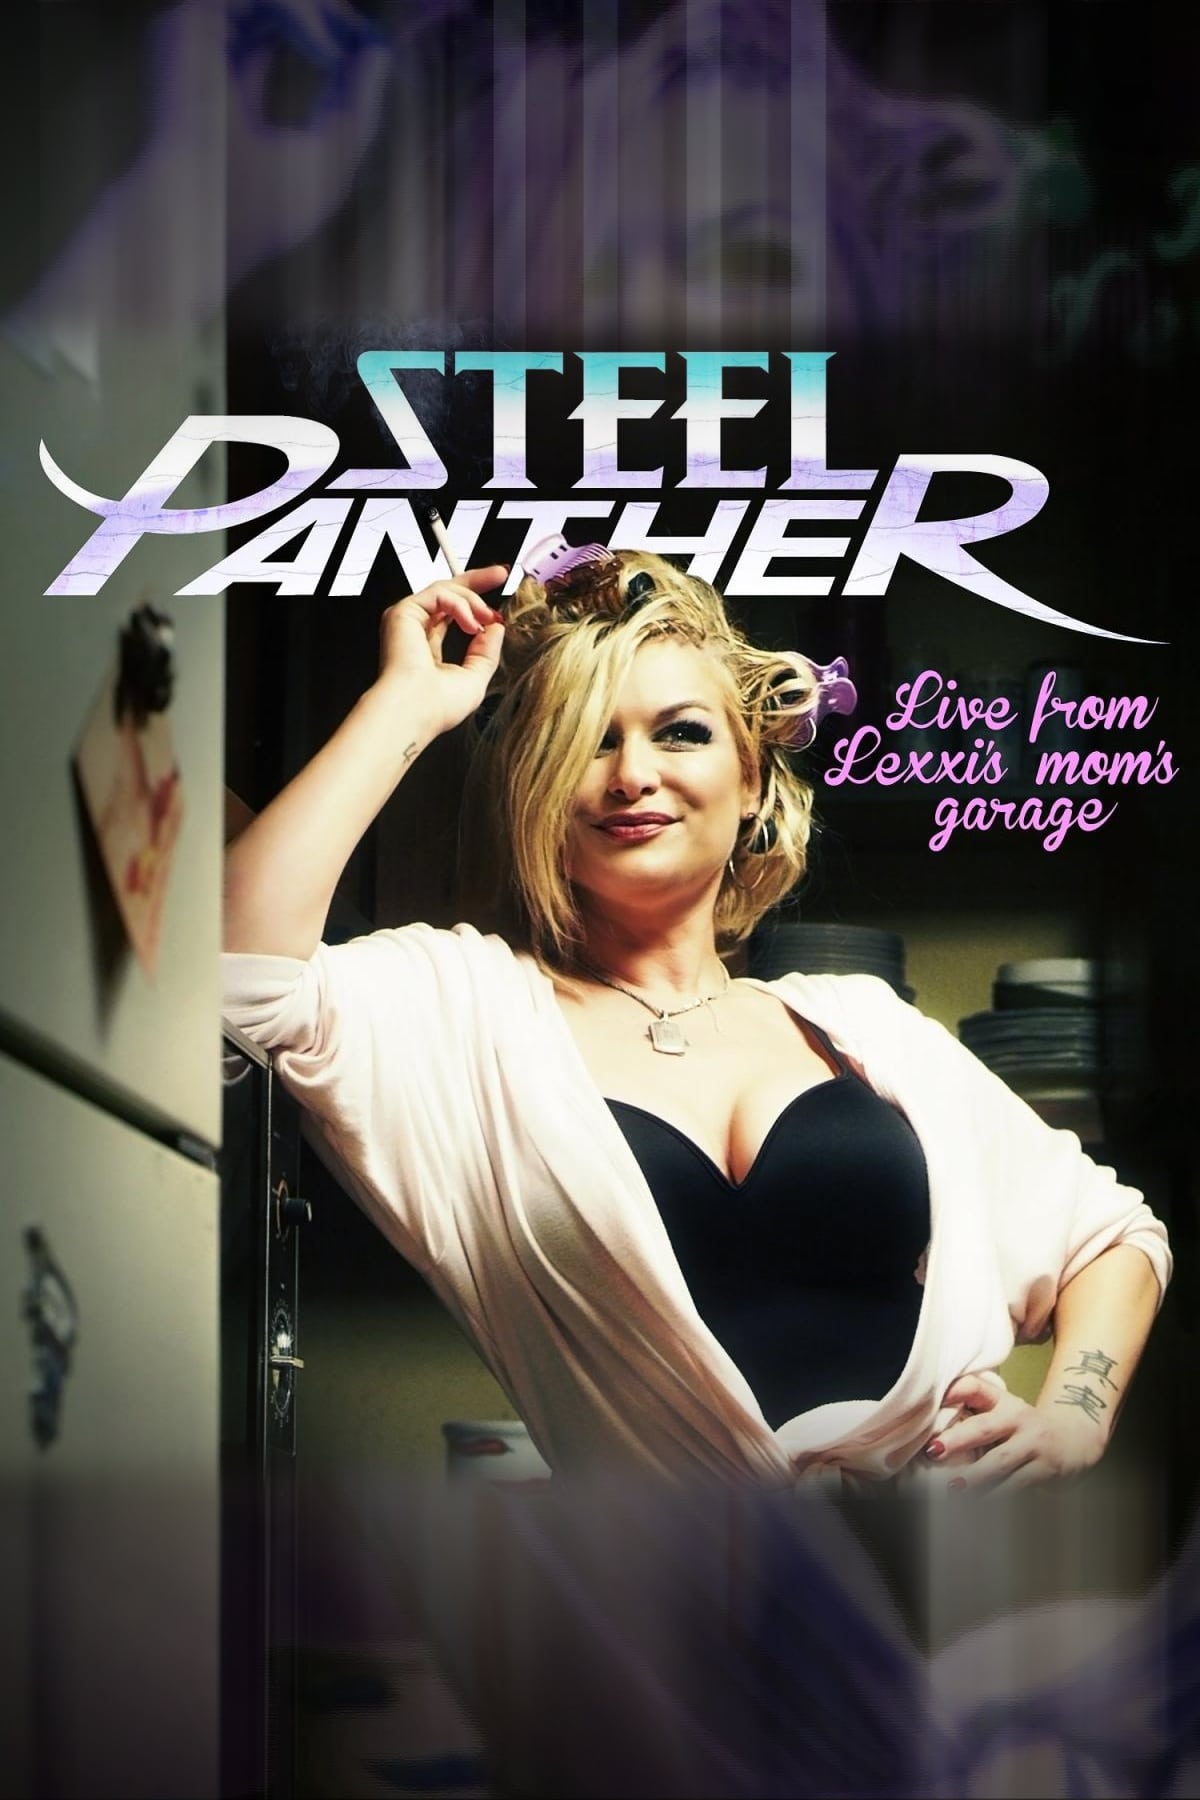 Steel Panther Live from Lexxi's Mom's Garage